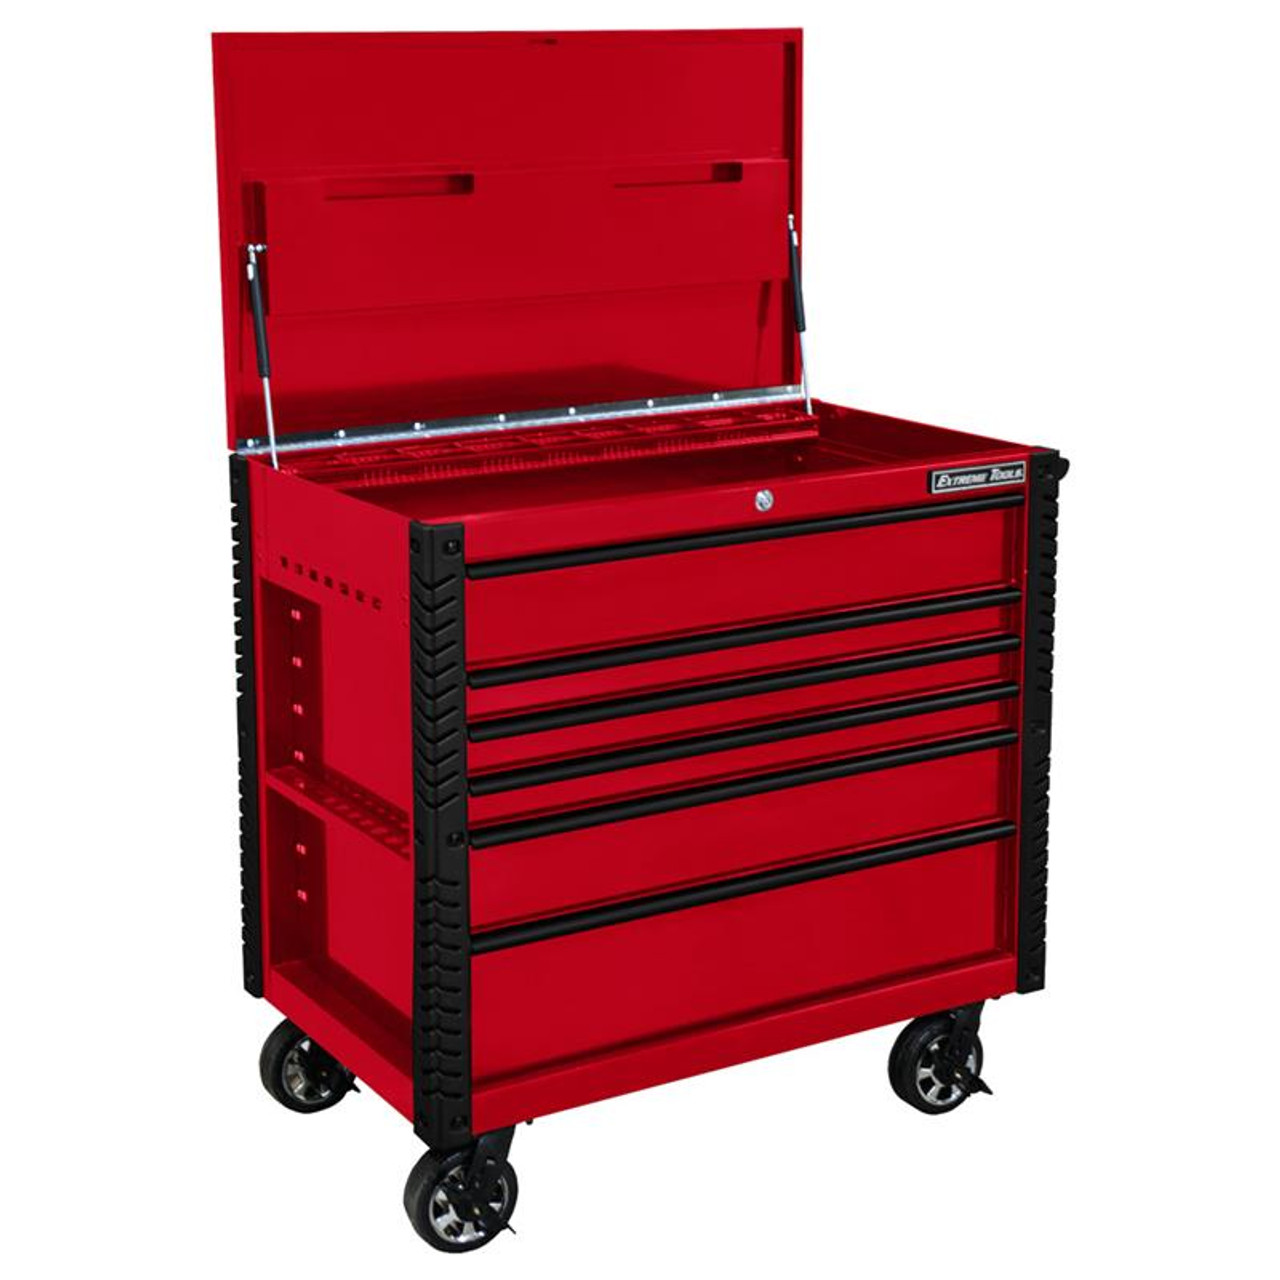 Extreme Tools EX4106TCRDBK 41" 6 Drawer Tool Cart - Red  with Black Drawer Pulls